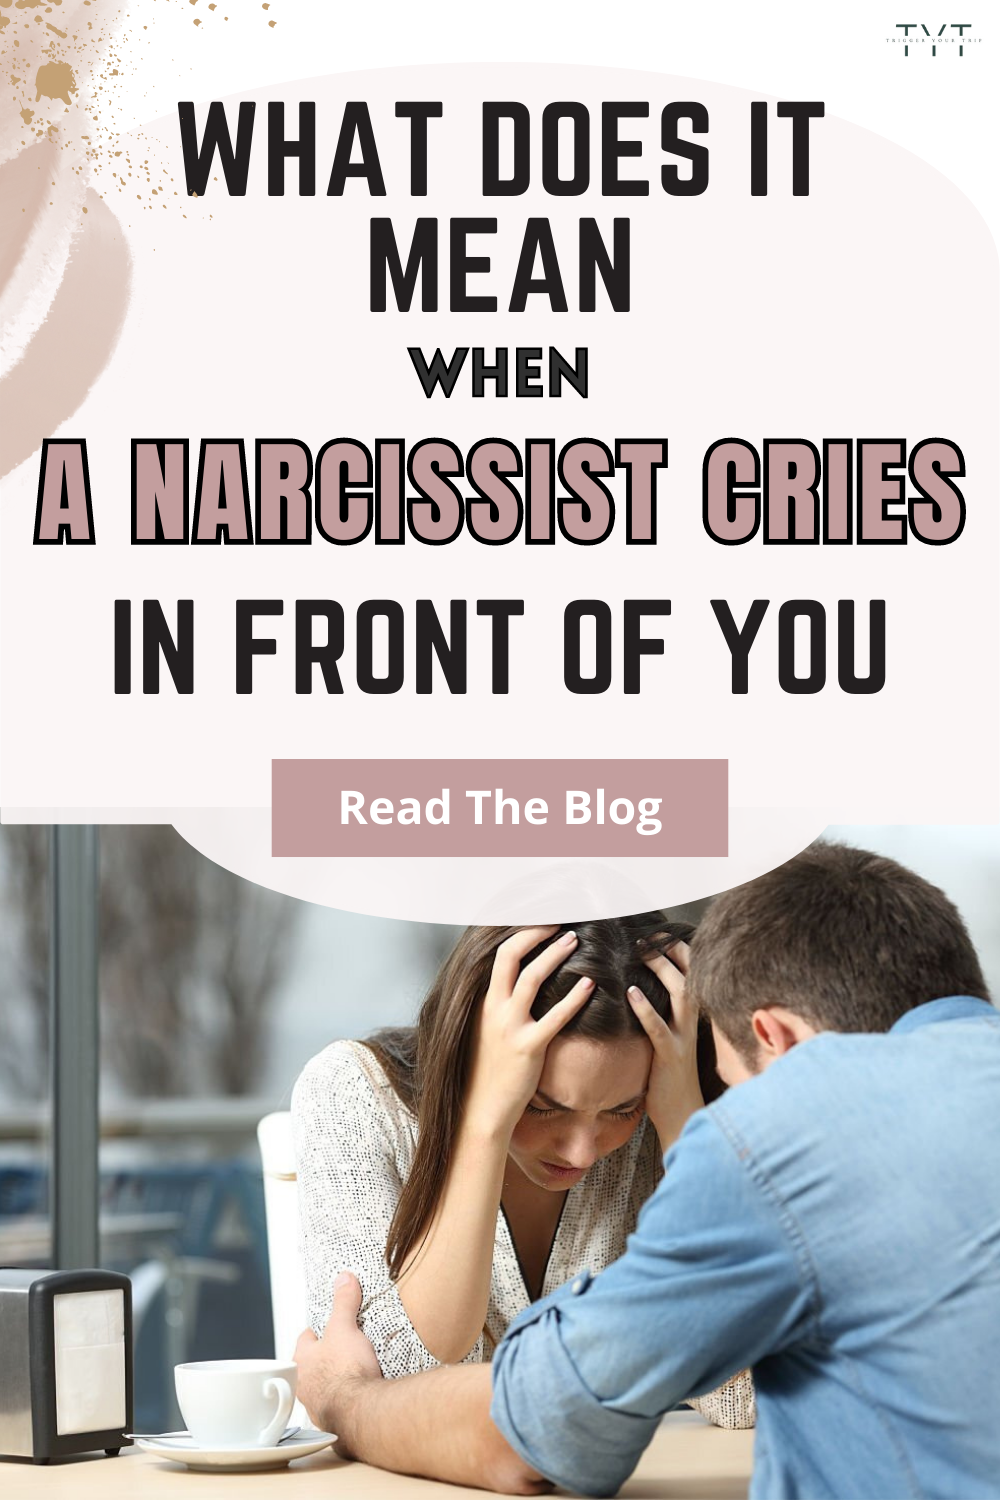 what does it mean when narcissists cry? a few reasons why a narcissist cry for physical intimidation with crocodile tears